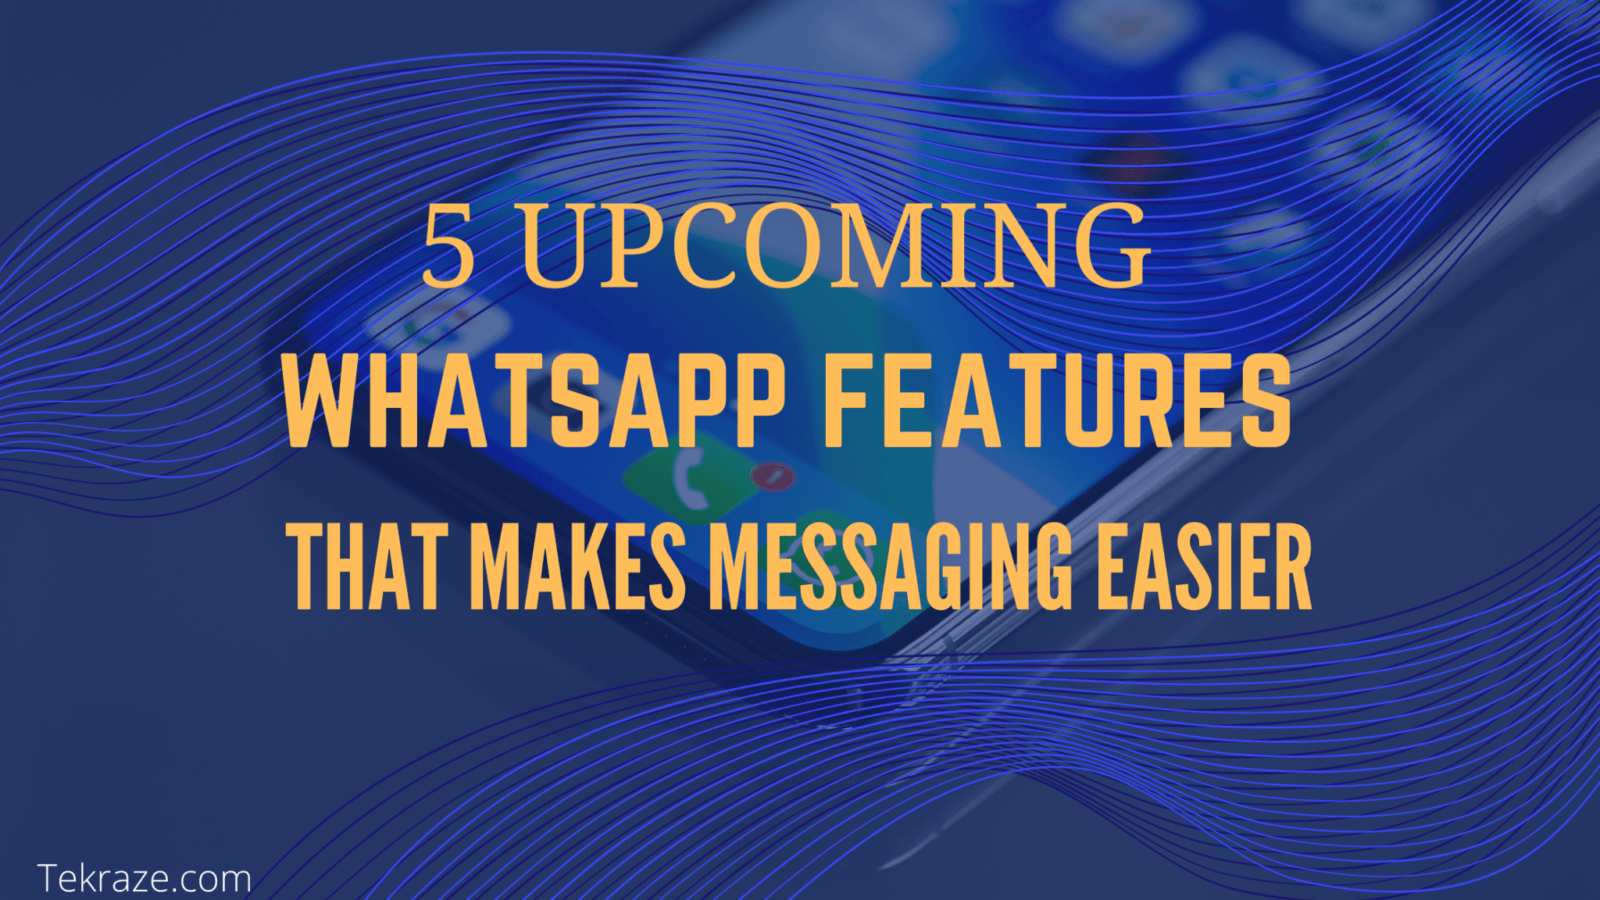 5 UPCOMING WHATSAPP FEATURES THAT MAKES MESSAGING EASIER